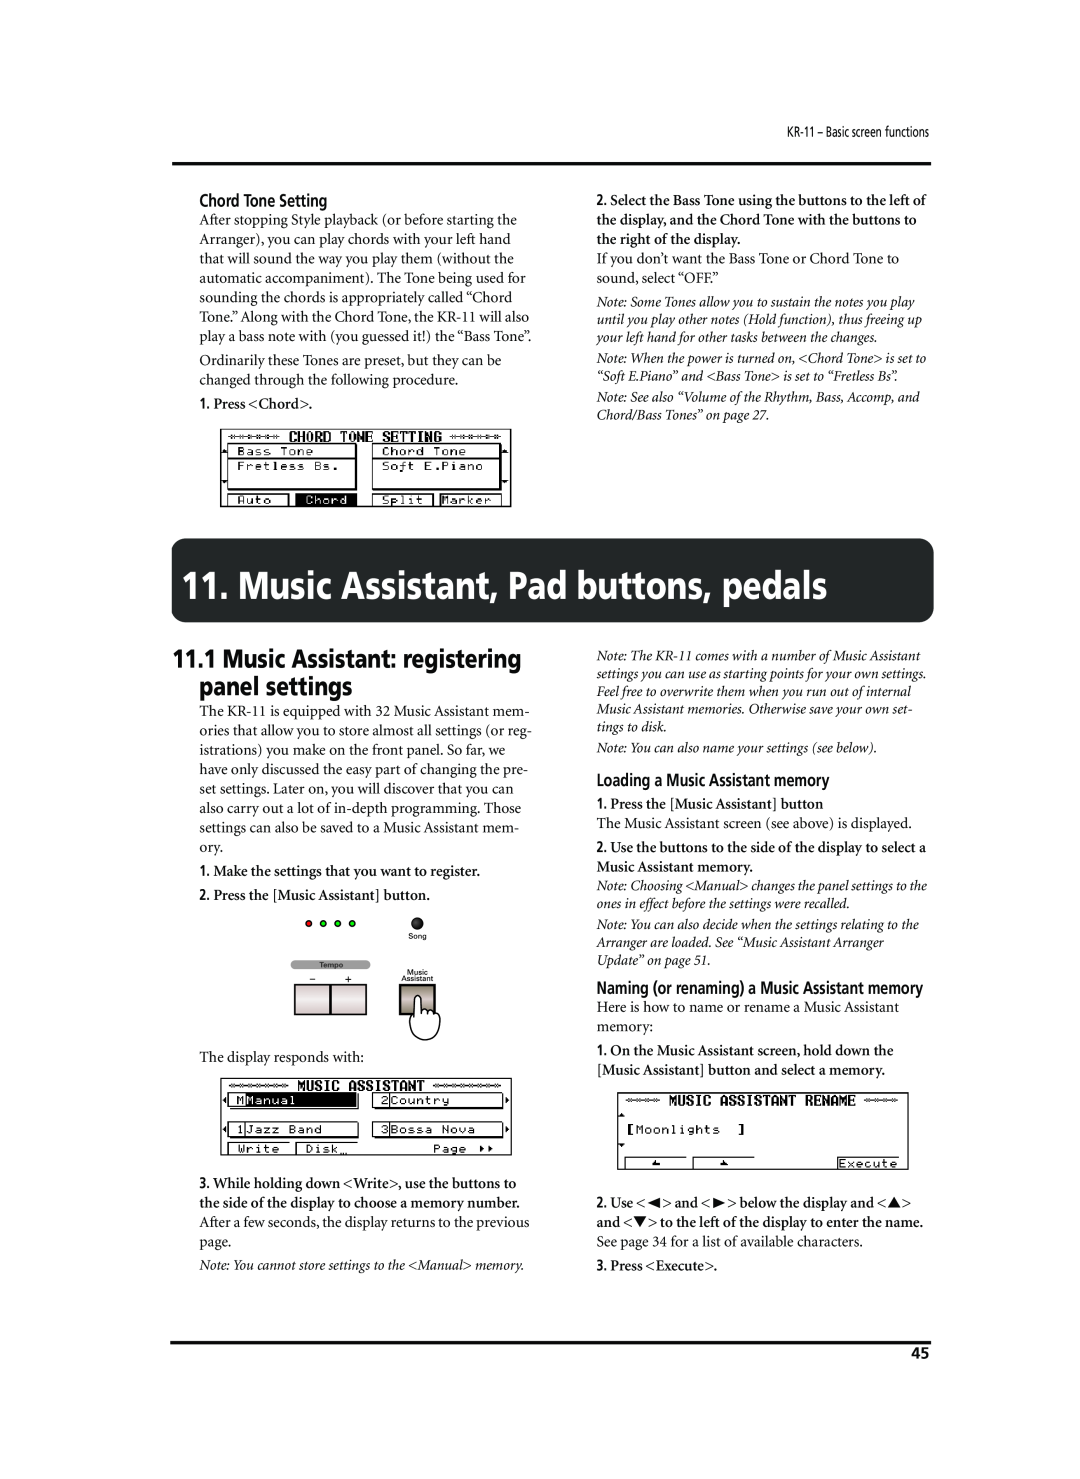 Roland KR-11 Music Assistant, Pad buttons, pedals, Music Assistant registering panel settings, Chord Tone Setting 